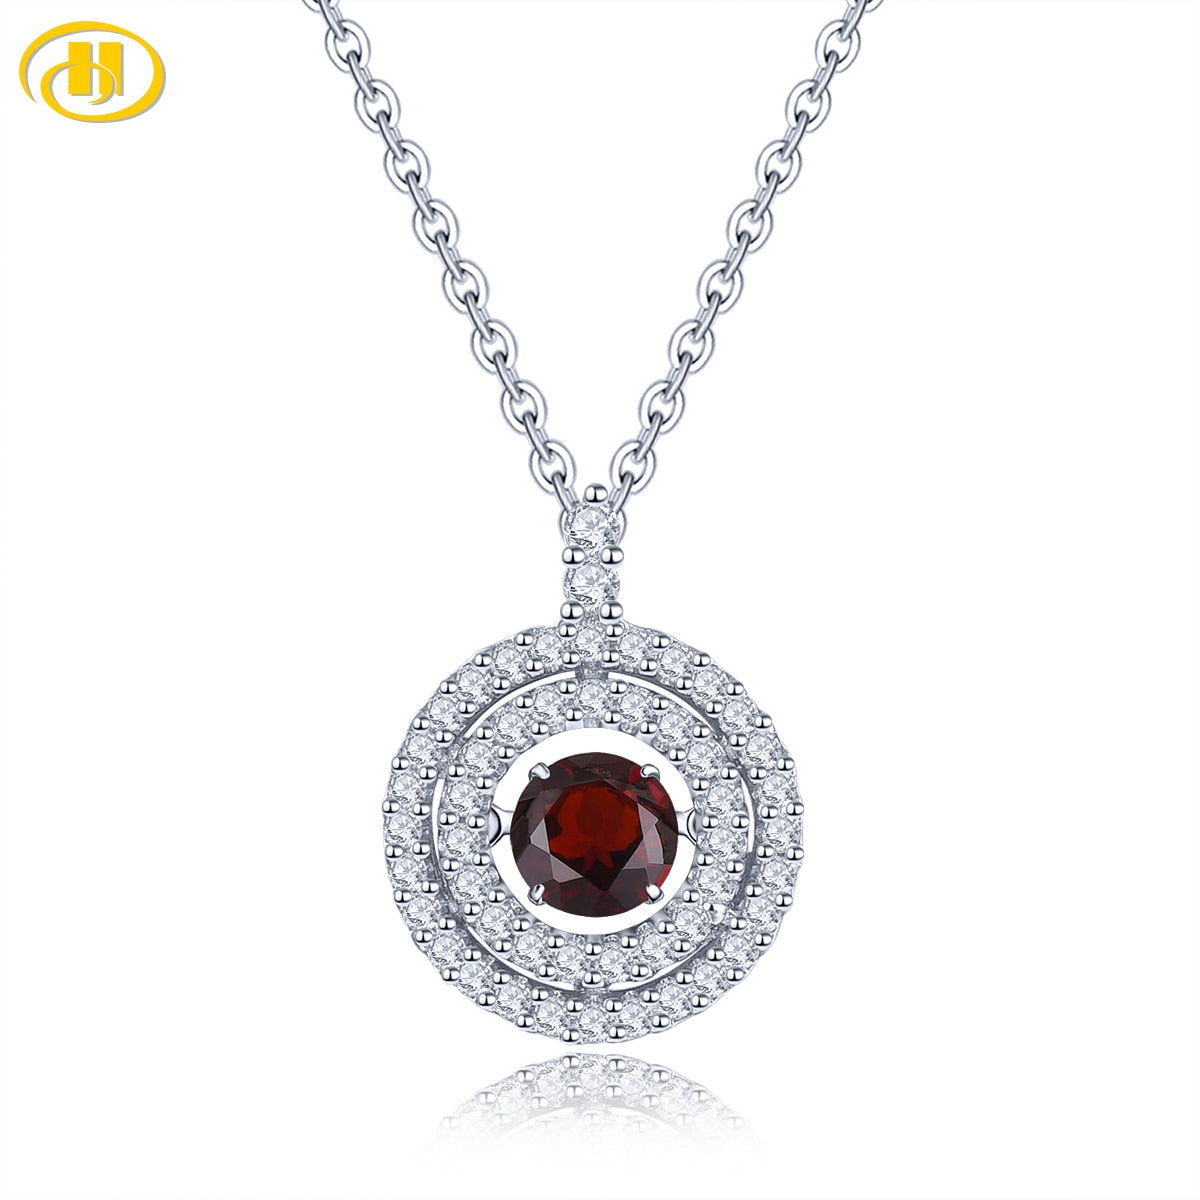 Natural Red Garnet Sterling Silver Pendant Round 4.5mm Faced Cut Classic Style S925 Jewelry Mother's Day Gift Default Title